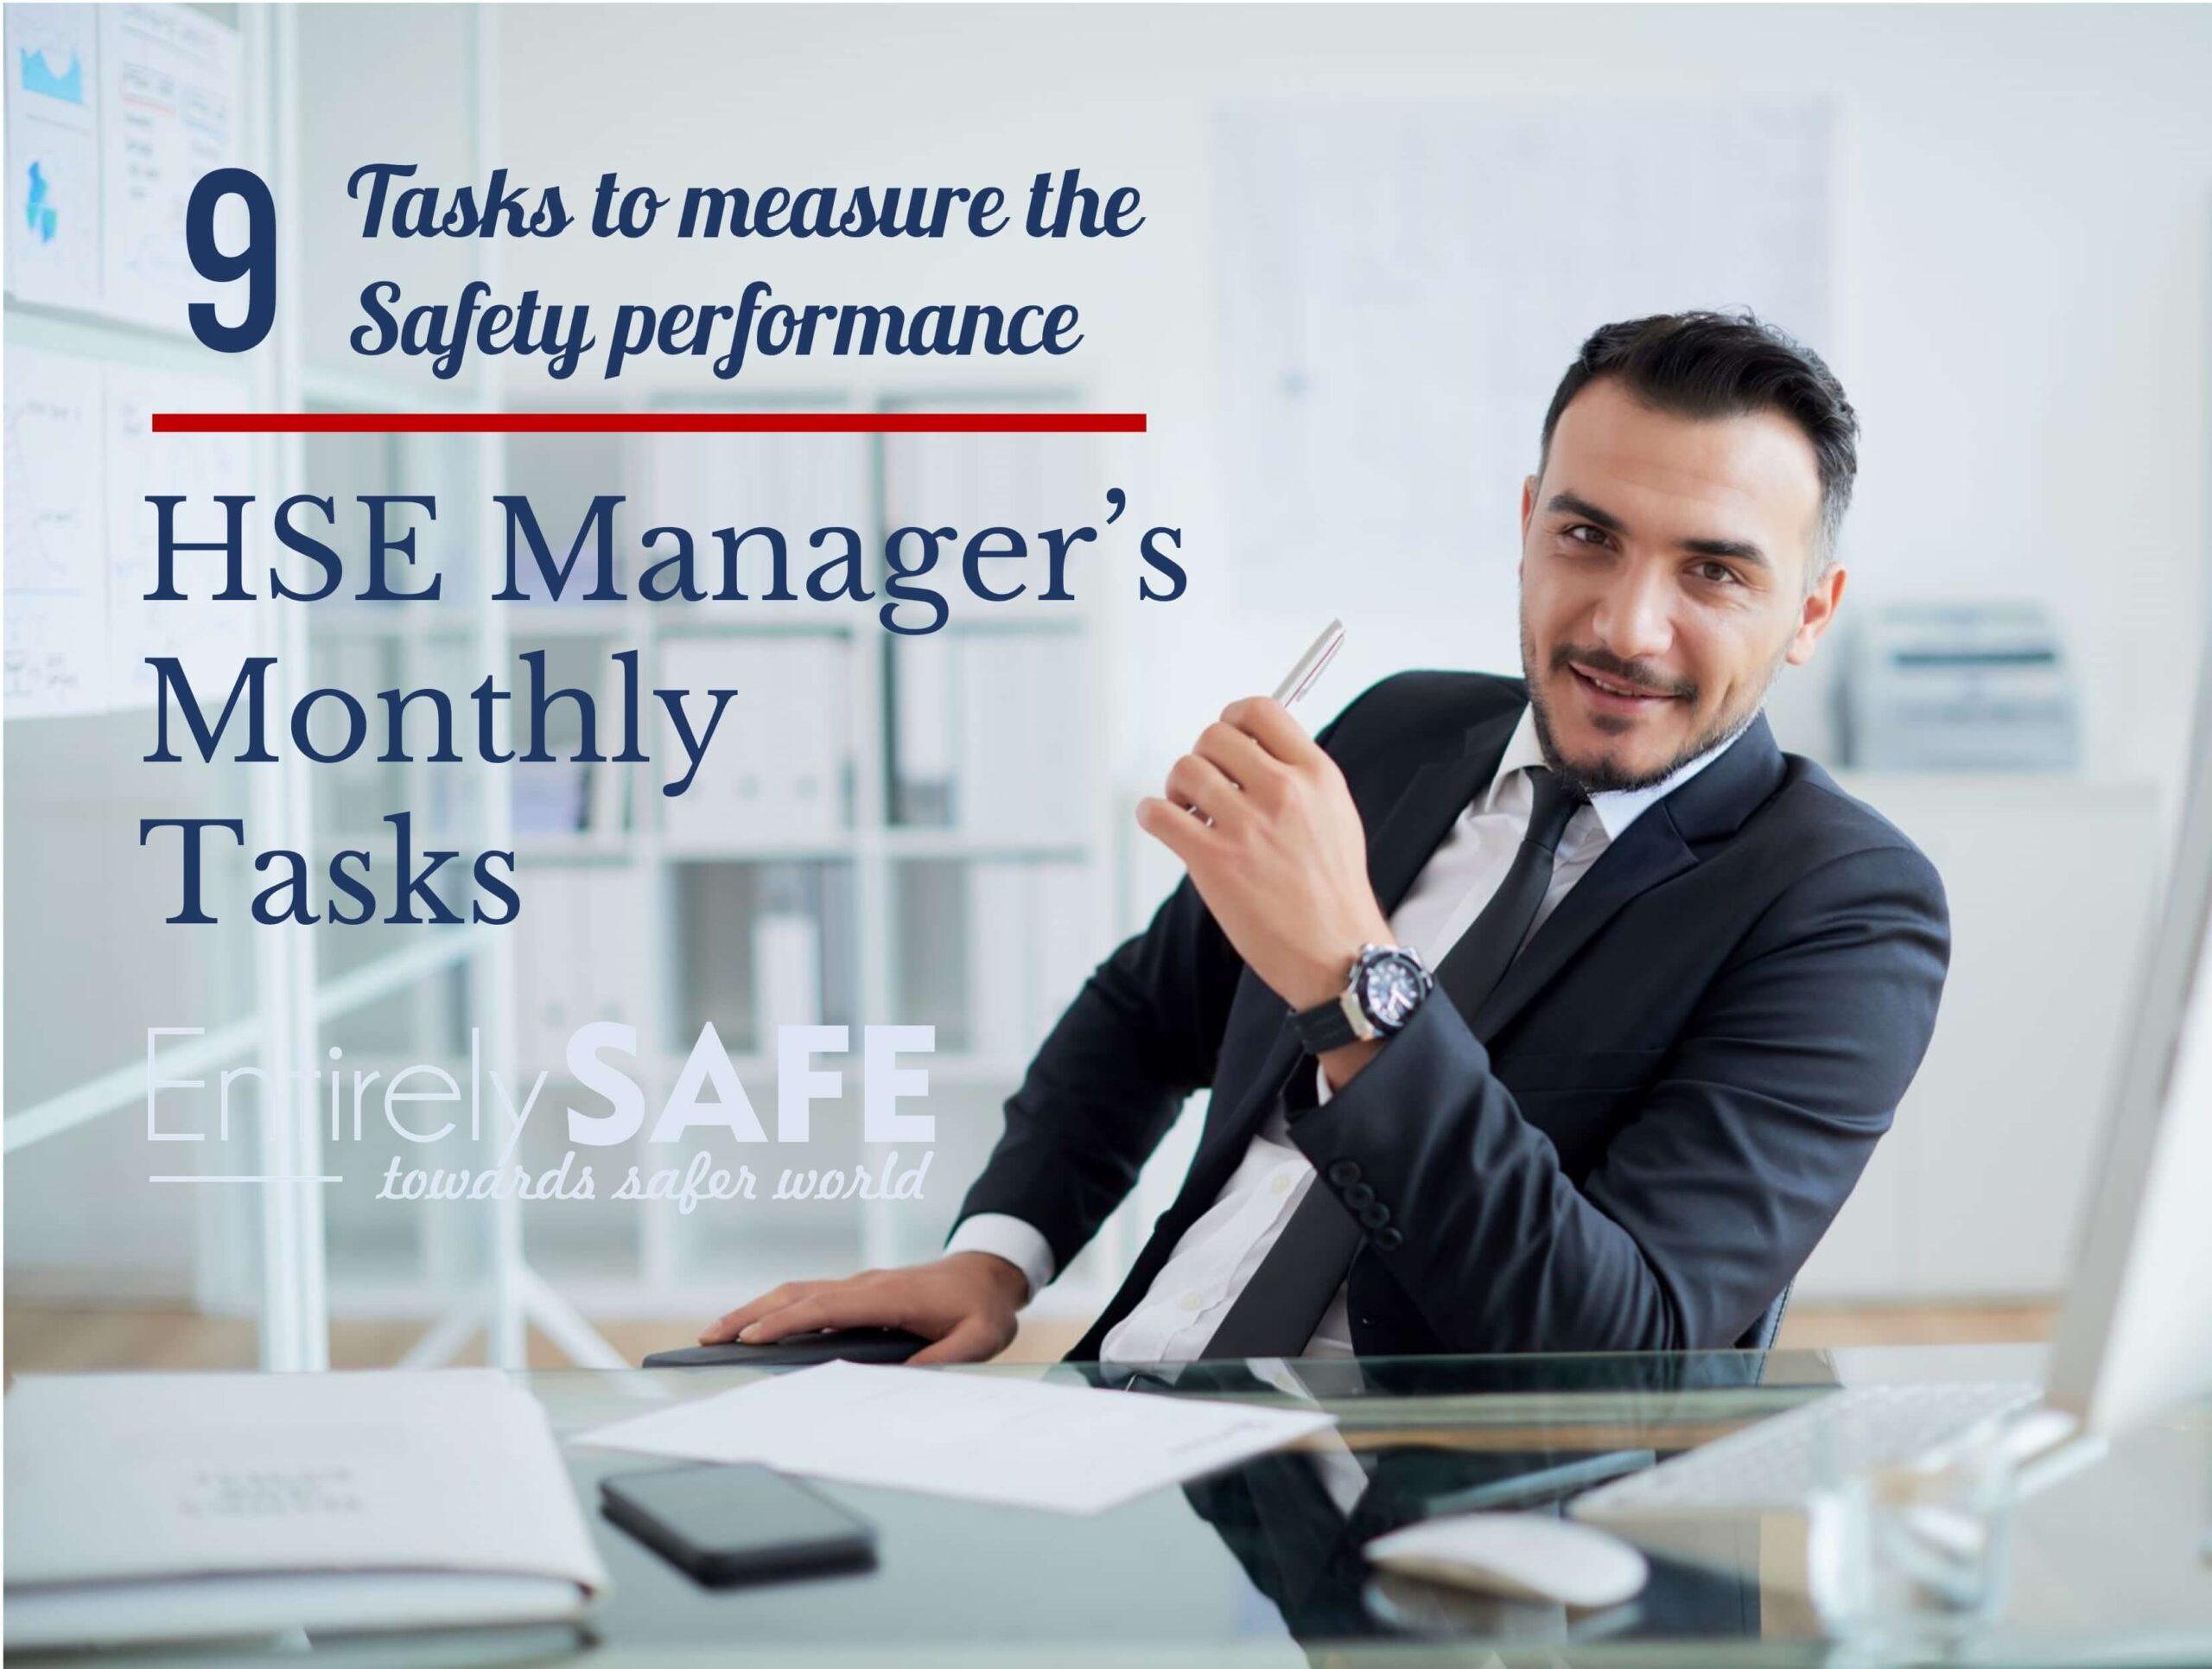 Monthly tasks for an HSE Manager: Ensuring the health, safety, and well-being of employees